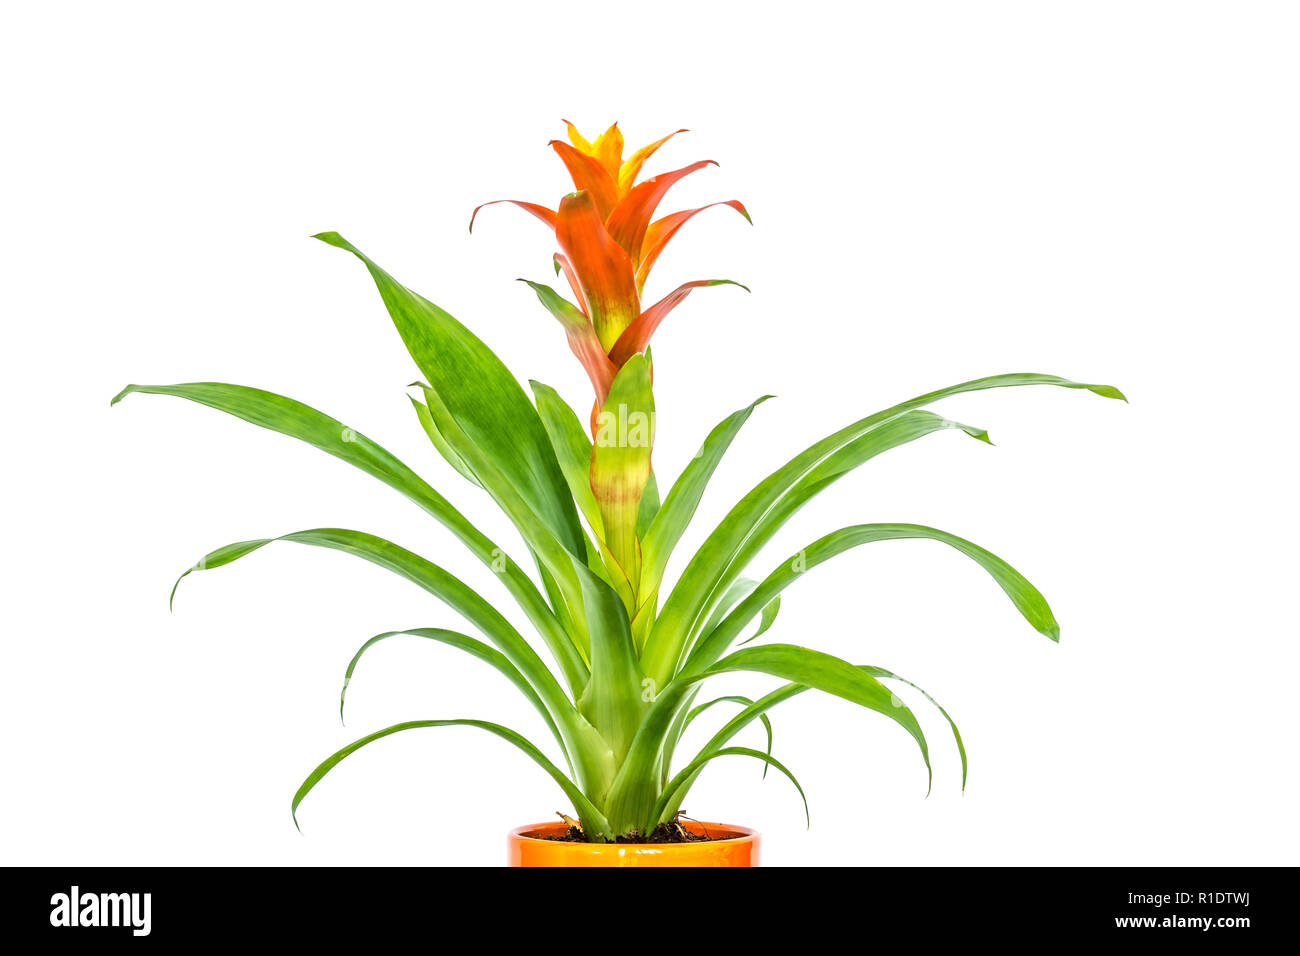 Blooming orange bromeliad flower with green leaves close-up isolated on white background Stock Photo